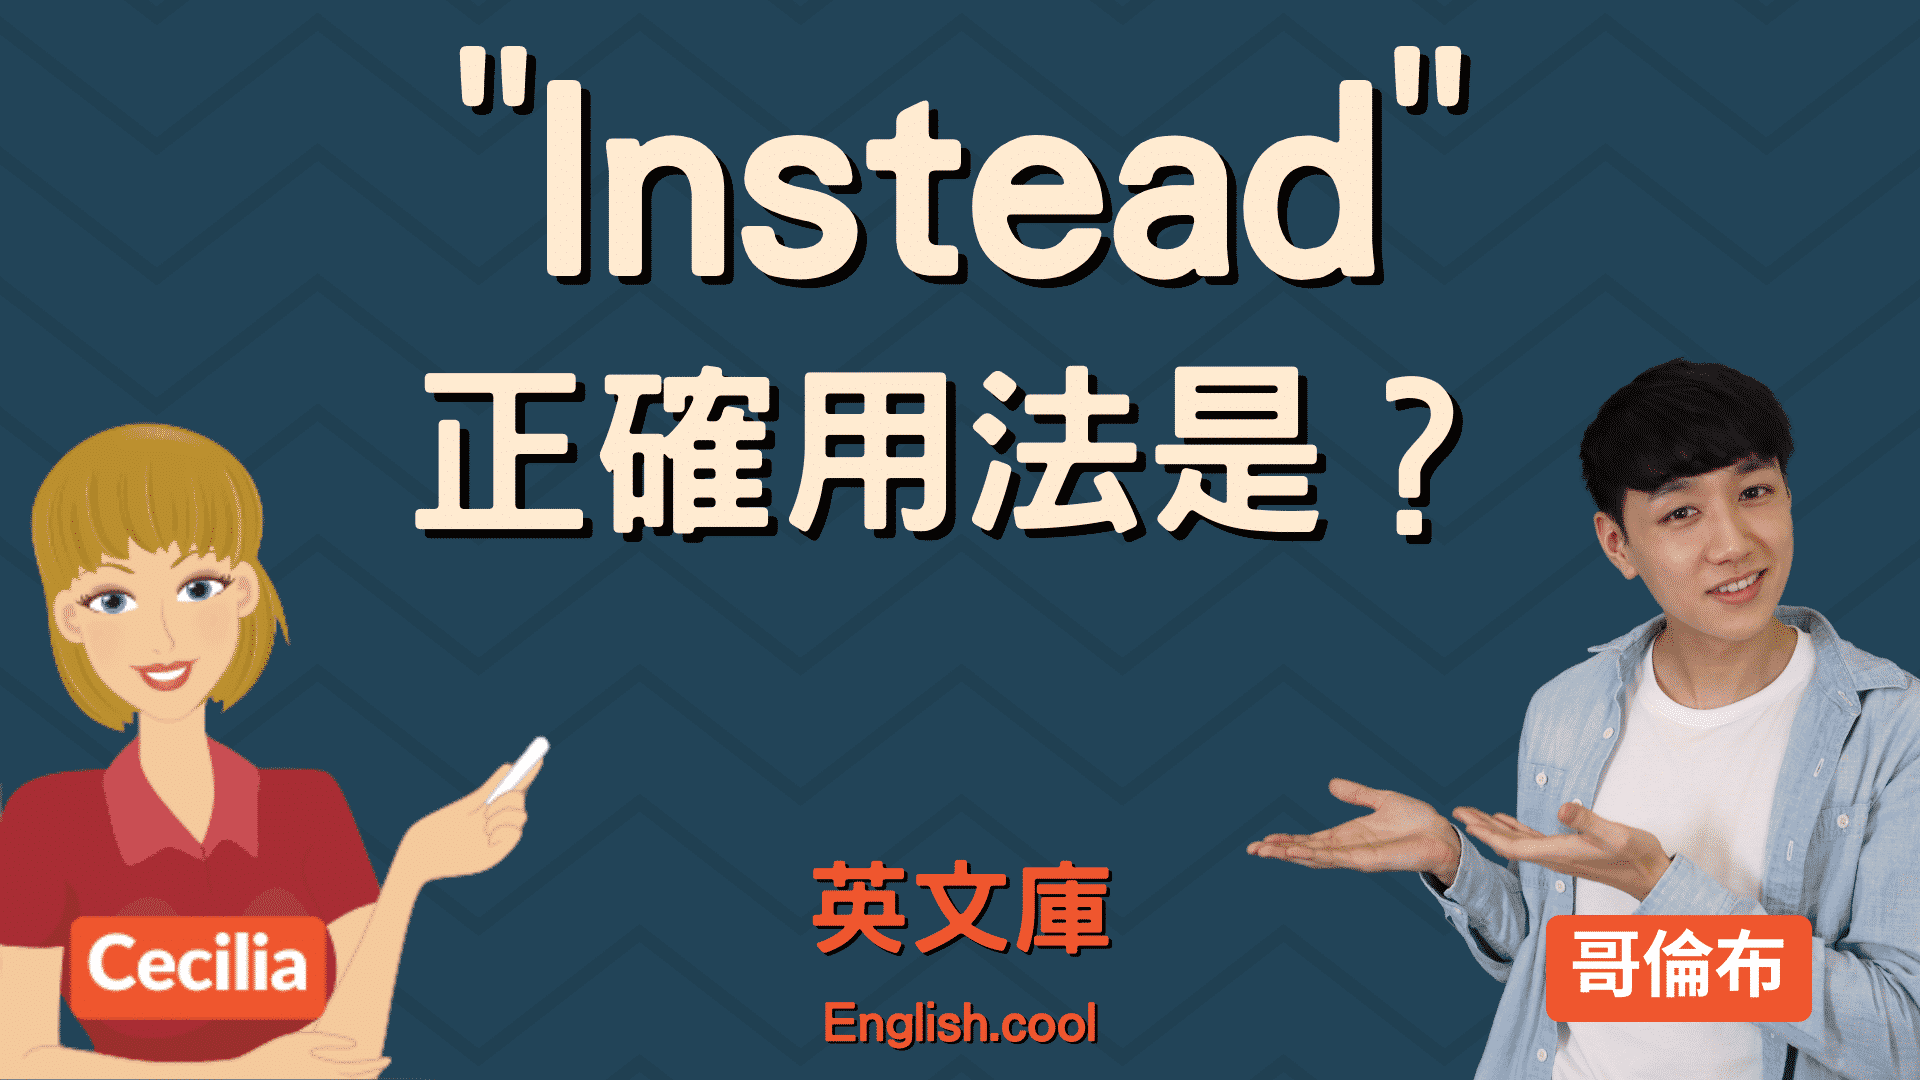 You are currently viewing 「instead」和 「instead of」正確用法是？差在哪？